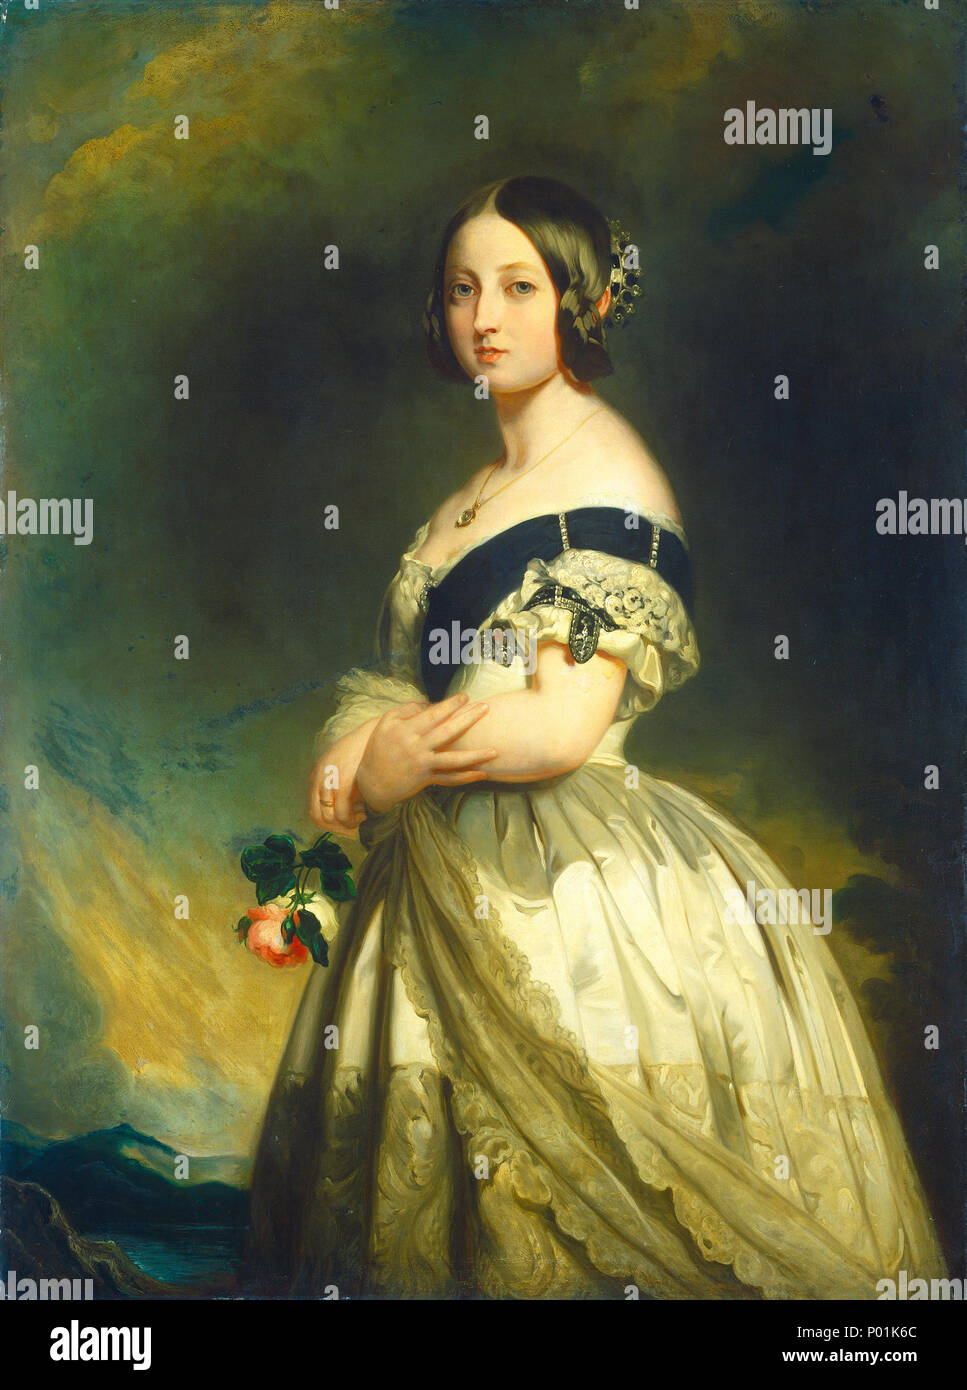 Painting; oil on canvas; overall: 128 x 95.9 cm (50 3/8 x 37 3/4 in.) framed: 144.8 x 113 x 7.6 cm (57 x 44 1/2 x 3 in.); 19 Queen Victoria G-000855-20111017 Stock Photo